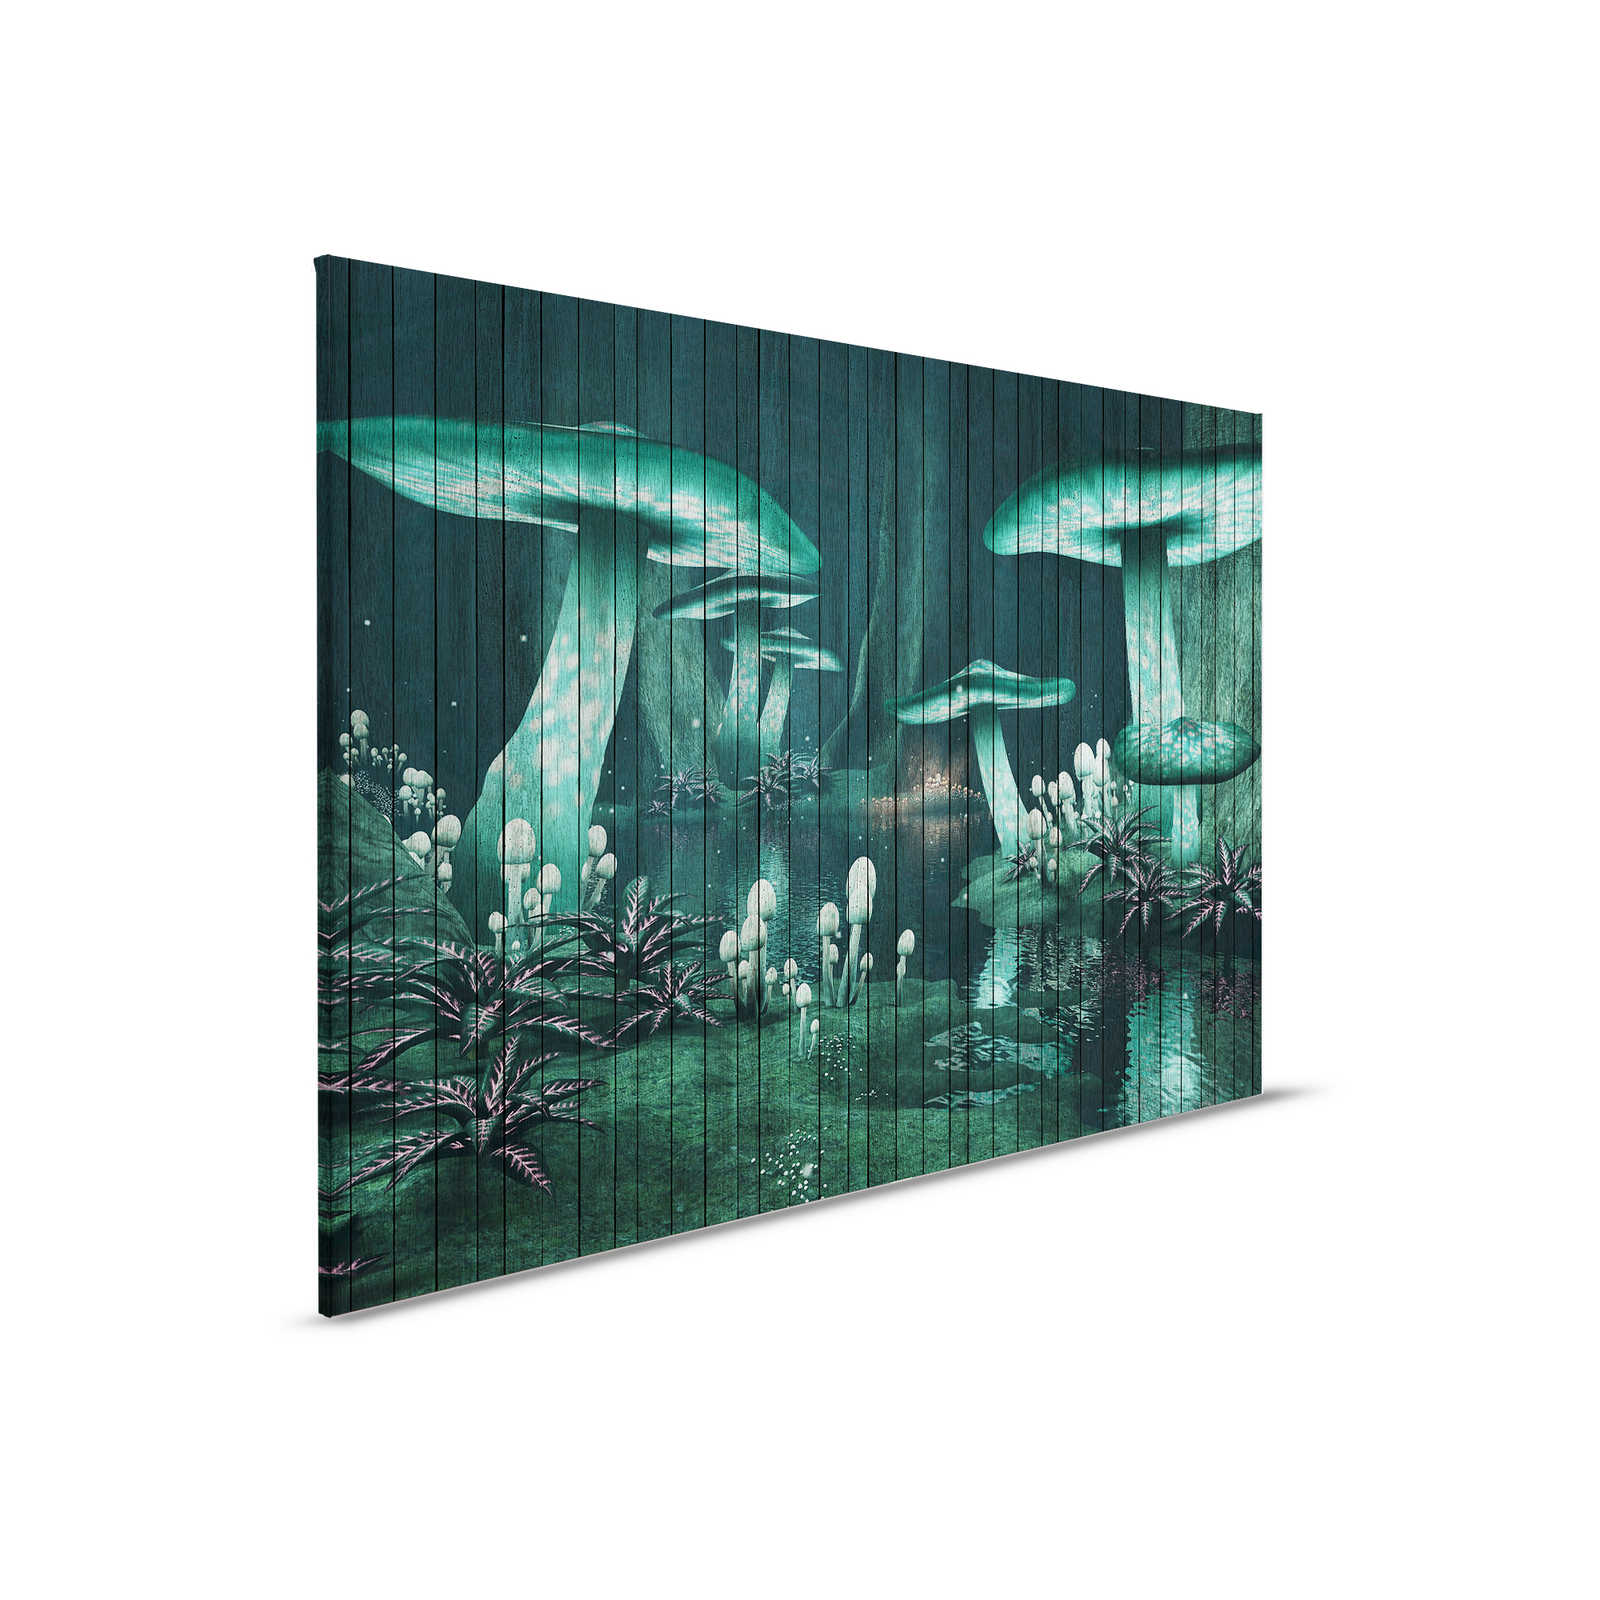         Fantasy 1 - Canvas painting Enchanted forest with wood look - 0,90 m x 0,60 m
    